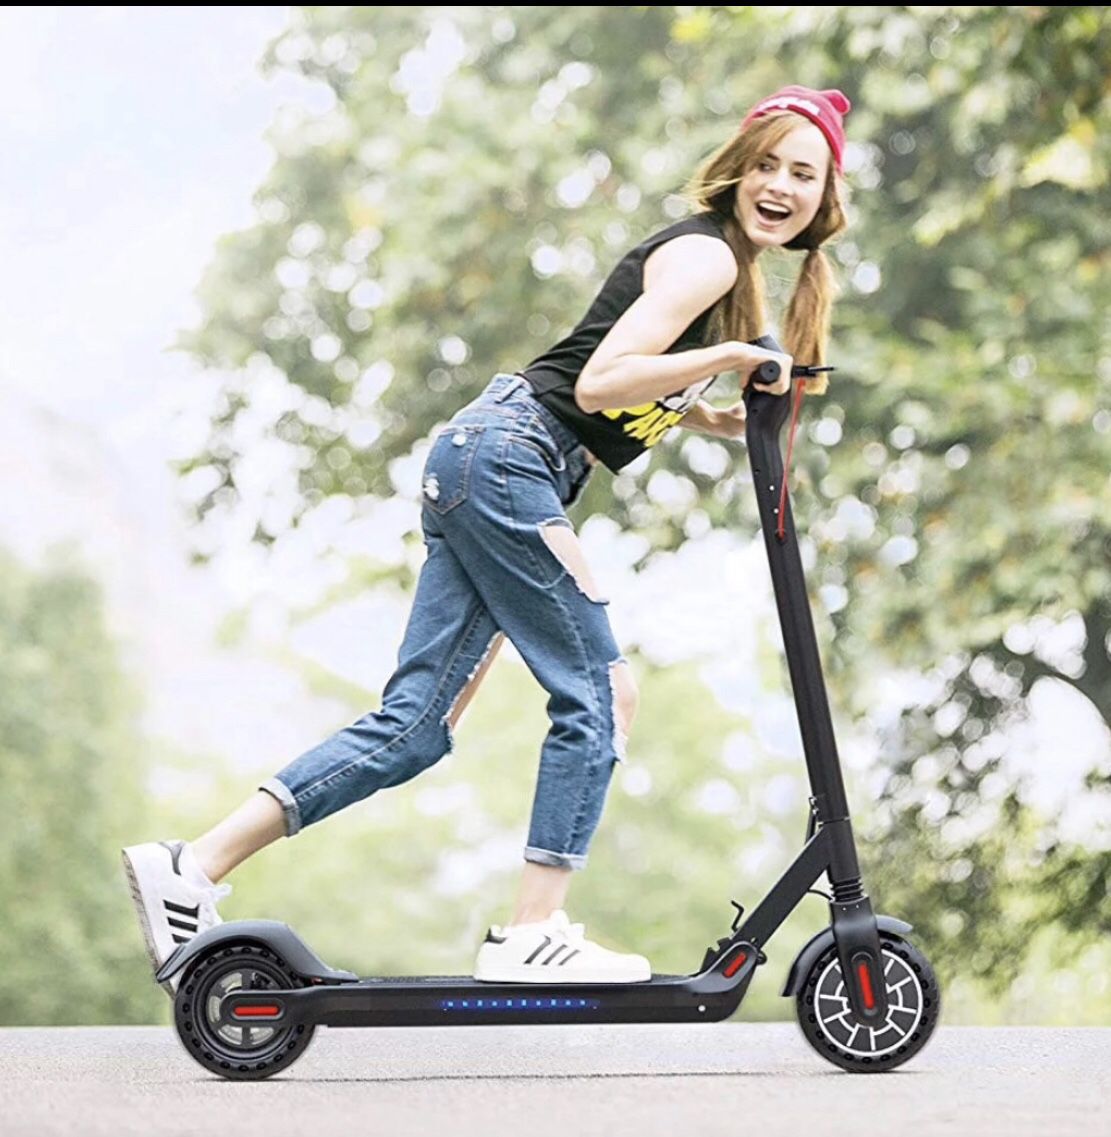 350w Max 20mph High Speed Riding Folding Electric Scooter 8.5in Wheels LED Display